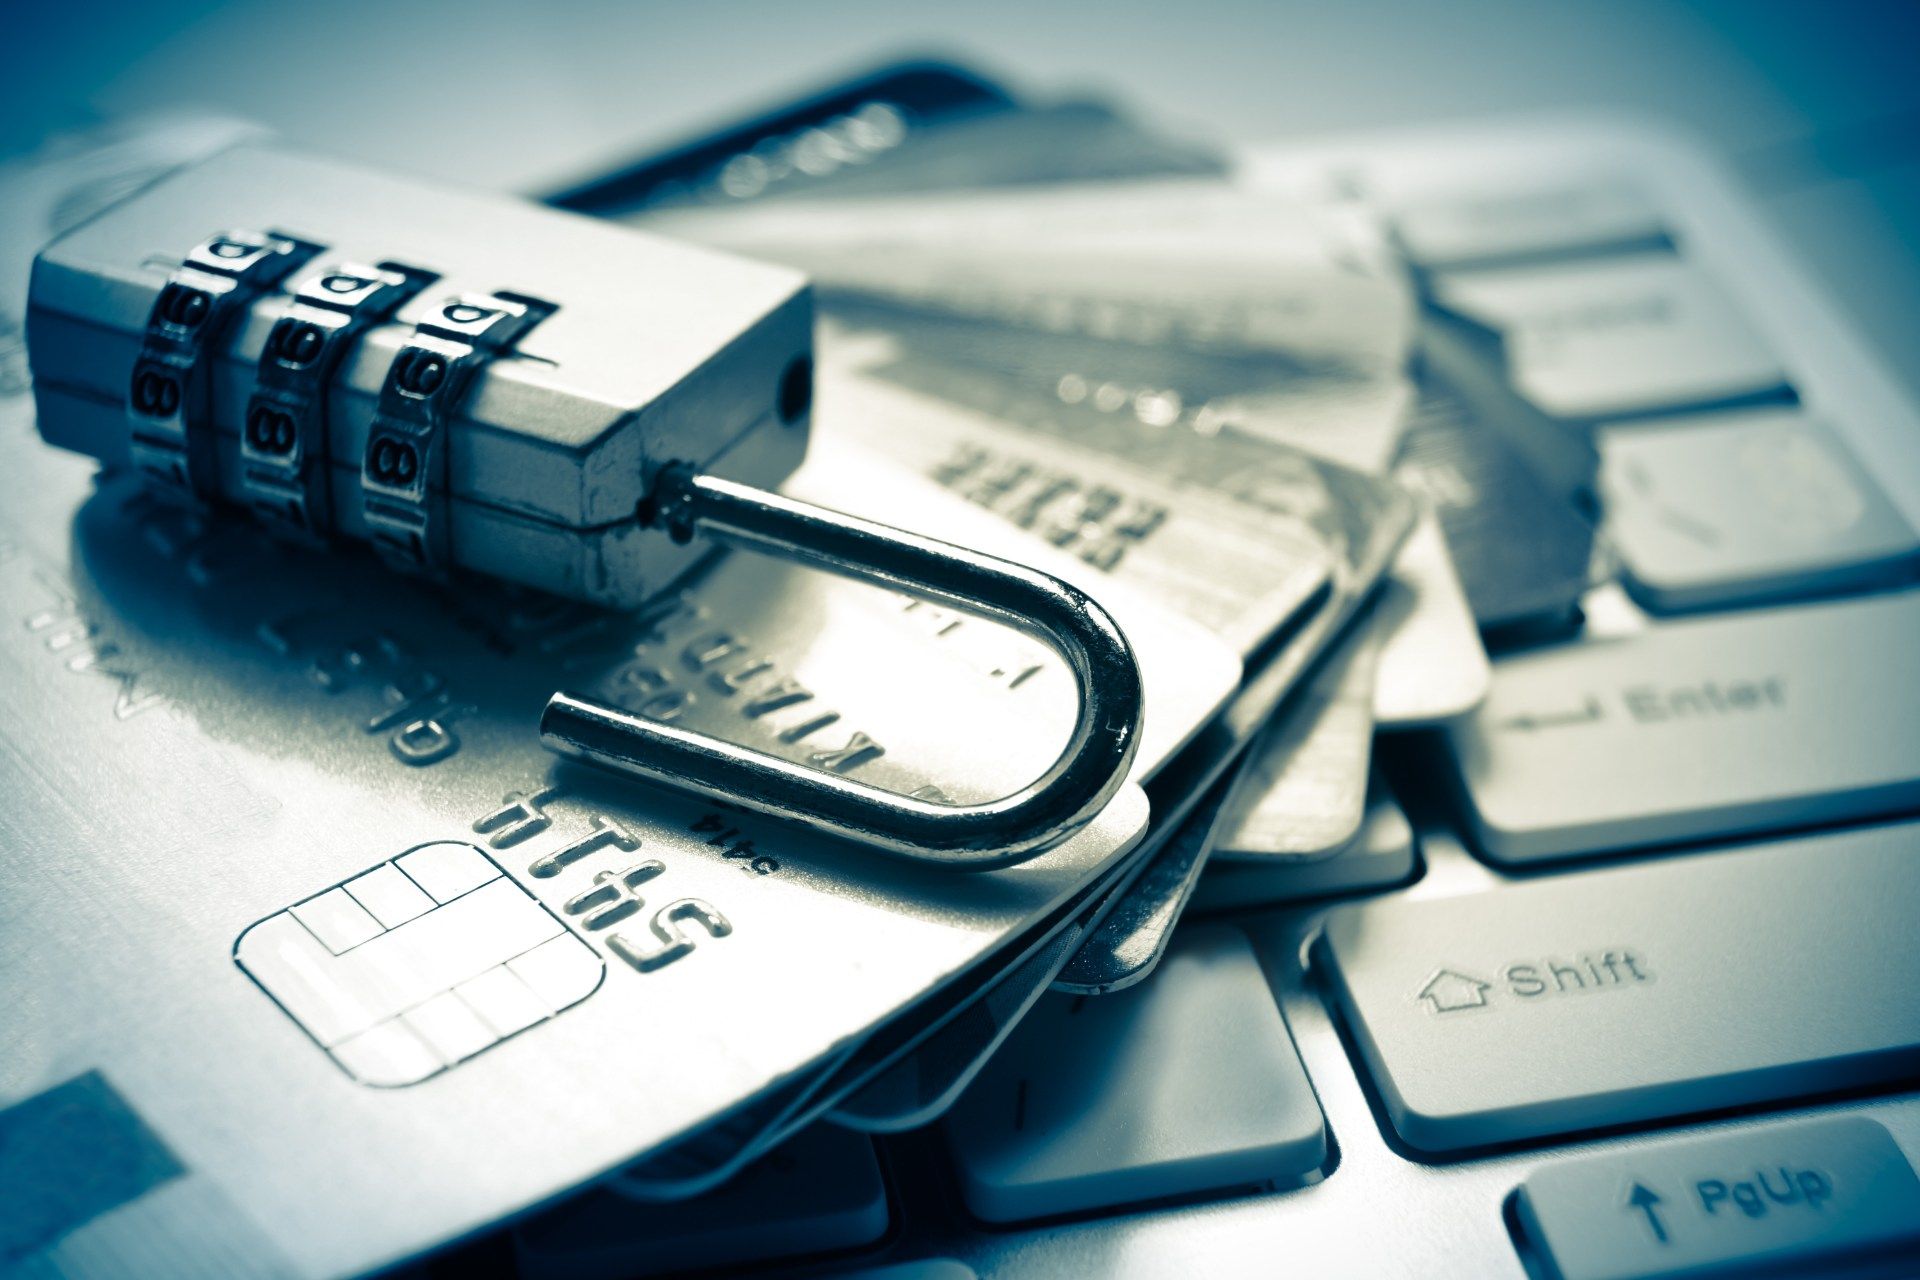 An open combination lock lies on top of a stack of credit cards on top of a computer keyboard - Dave banking app